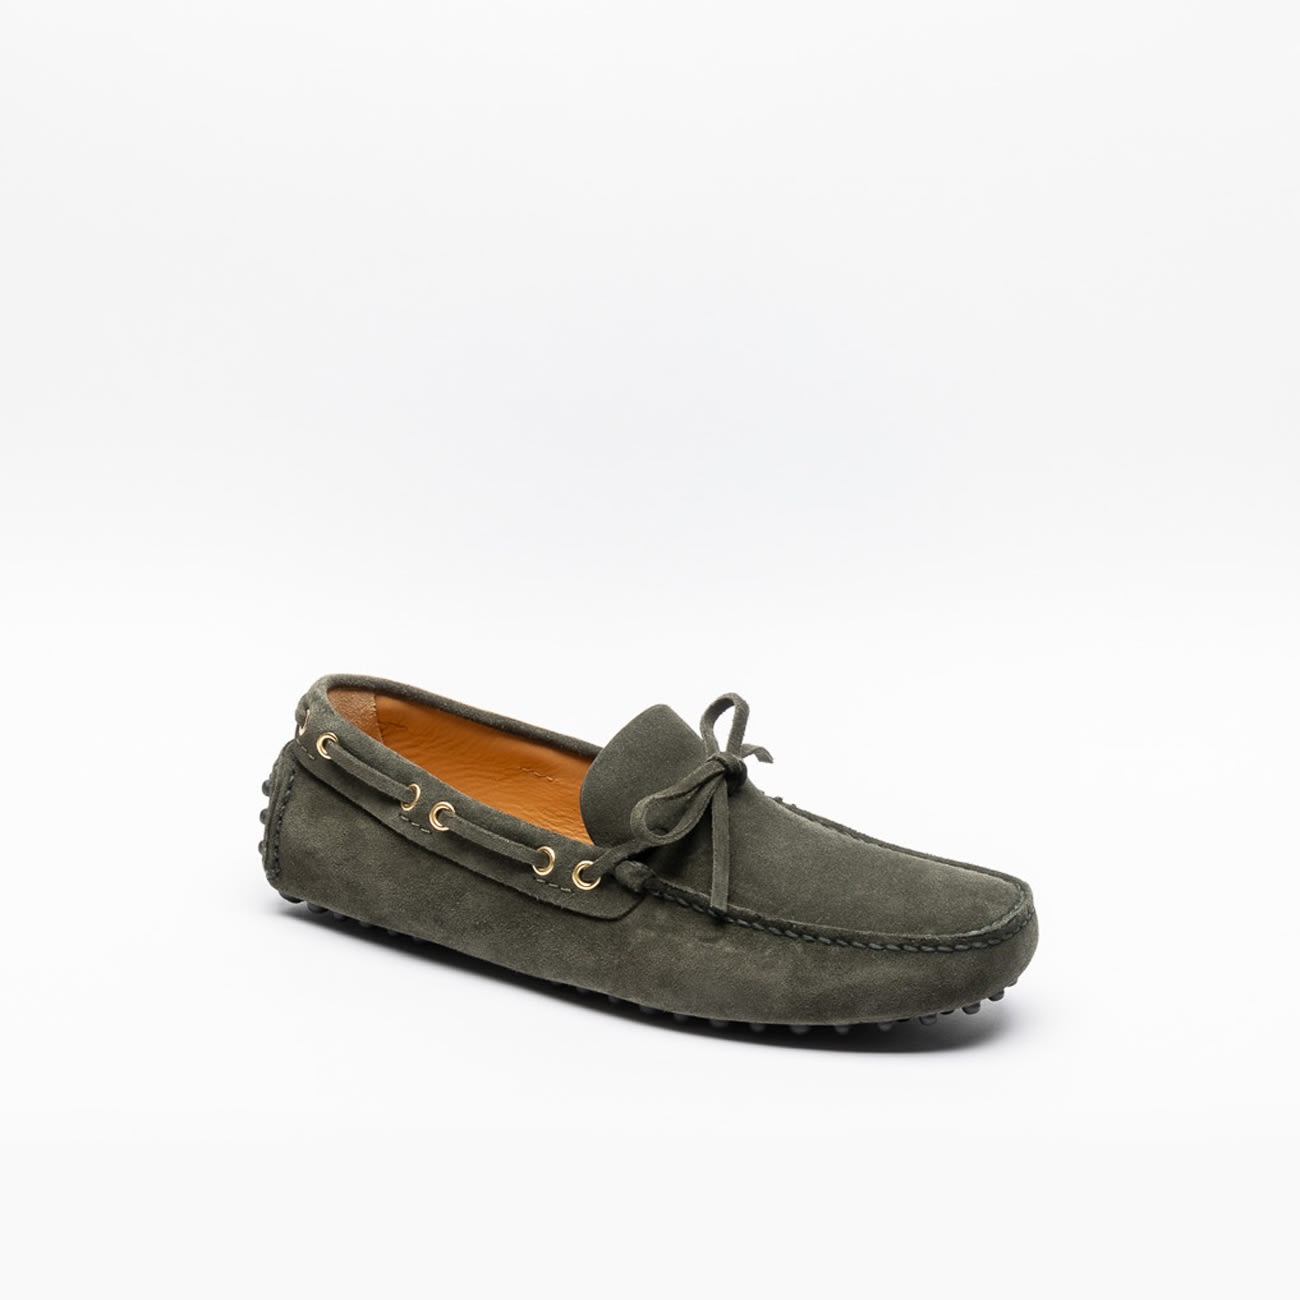 CAR SHOE KUD006 MILITARY GREEN SUEDE DRIVING LOAFER